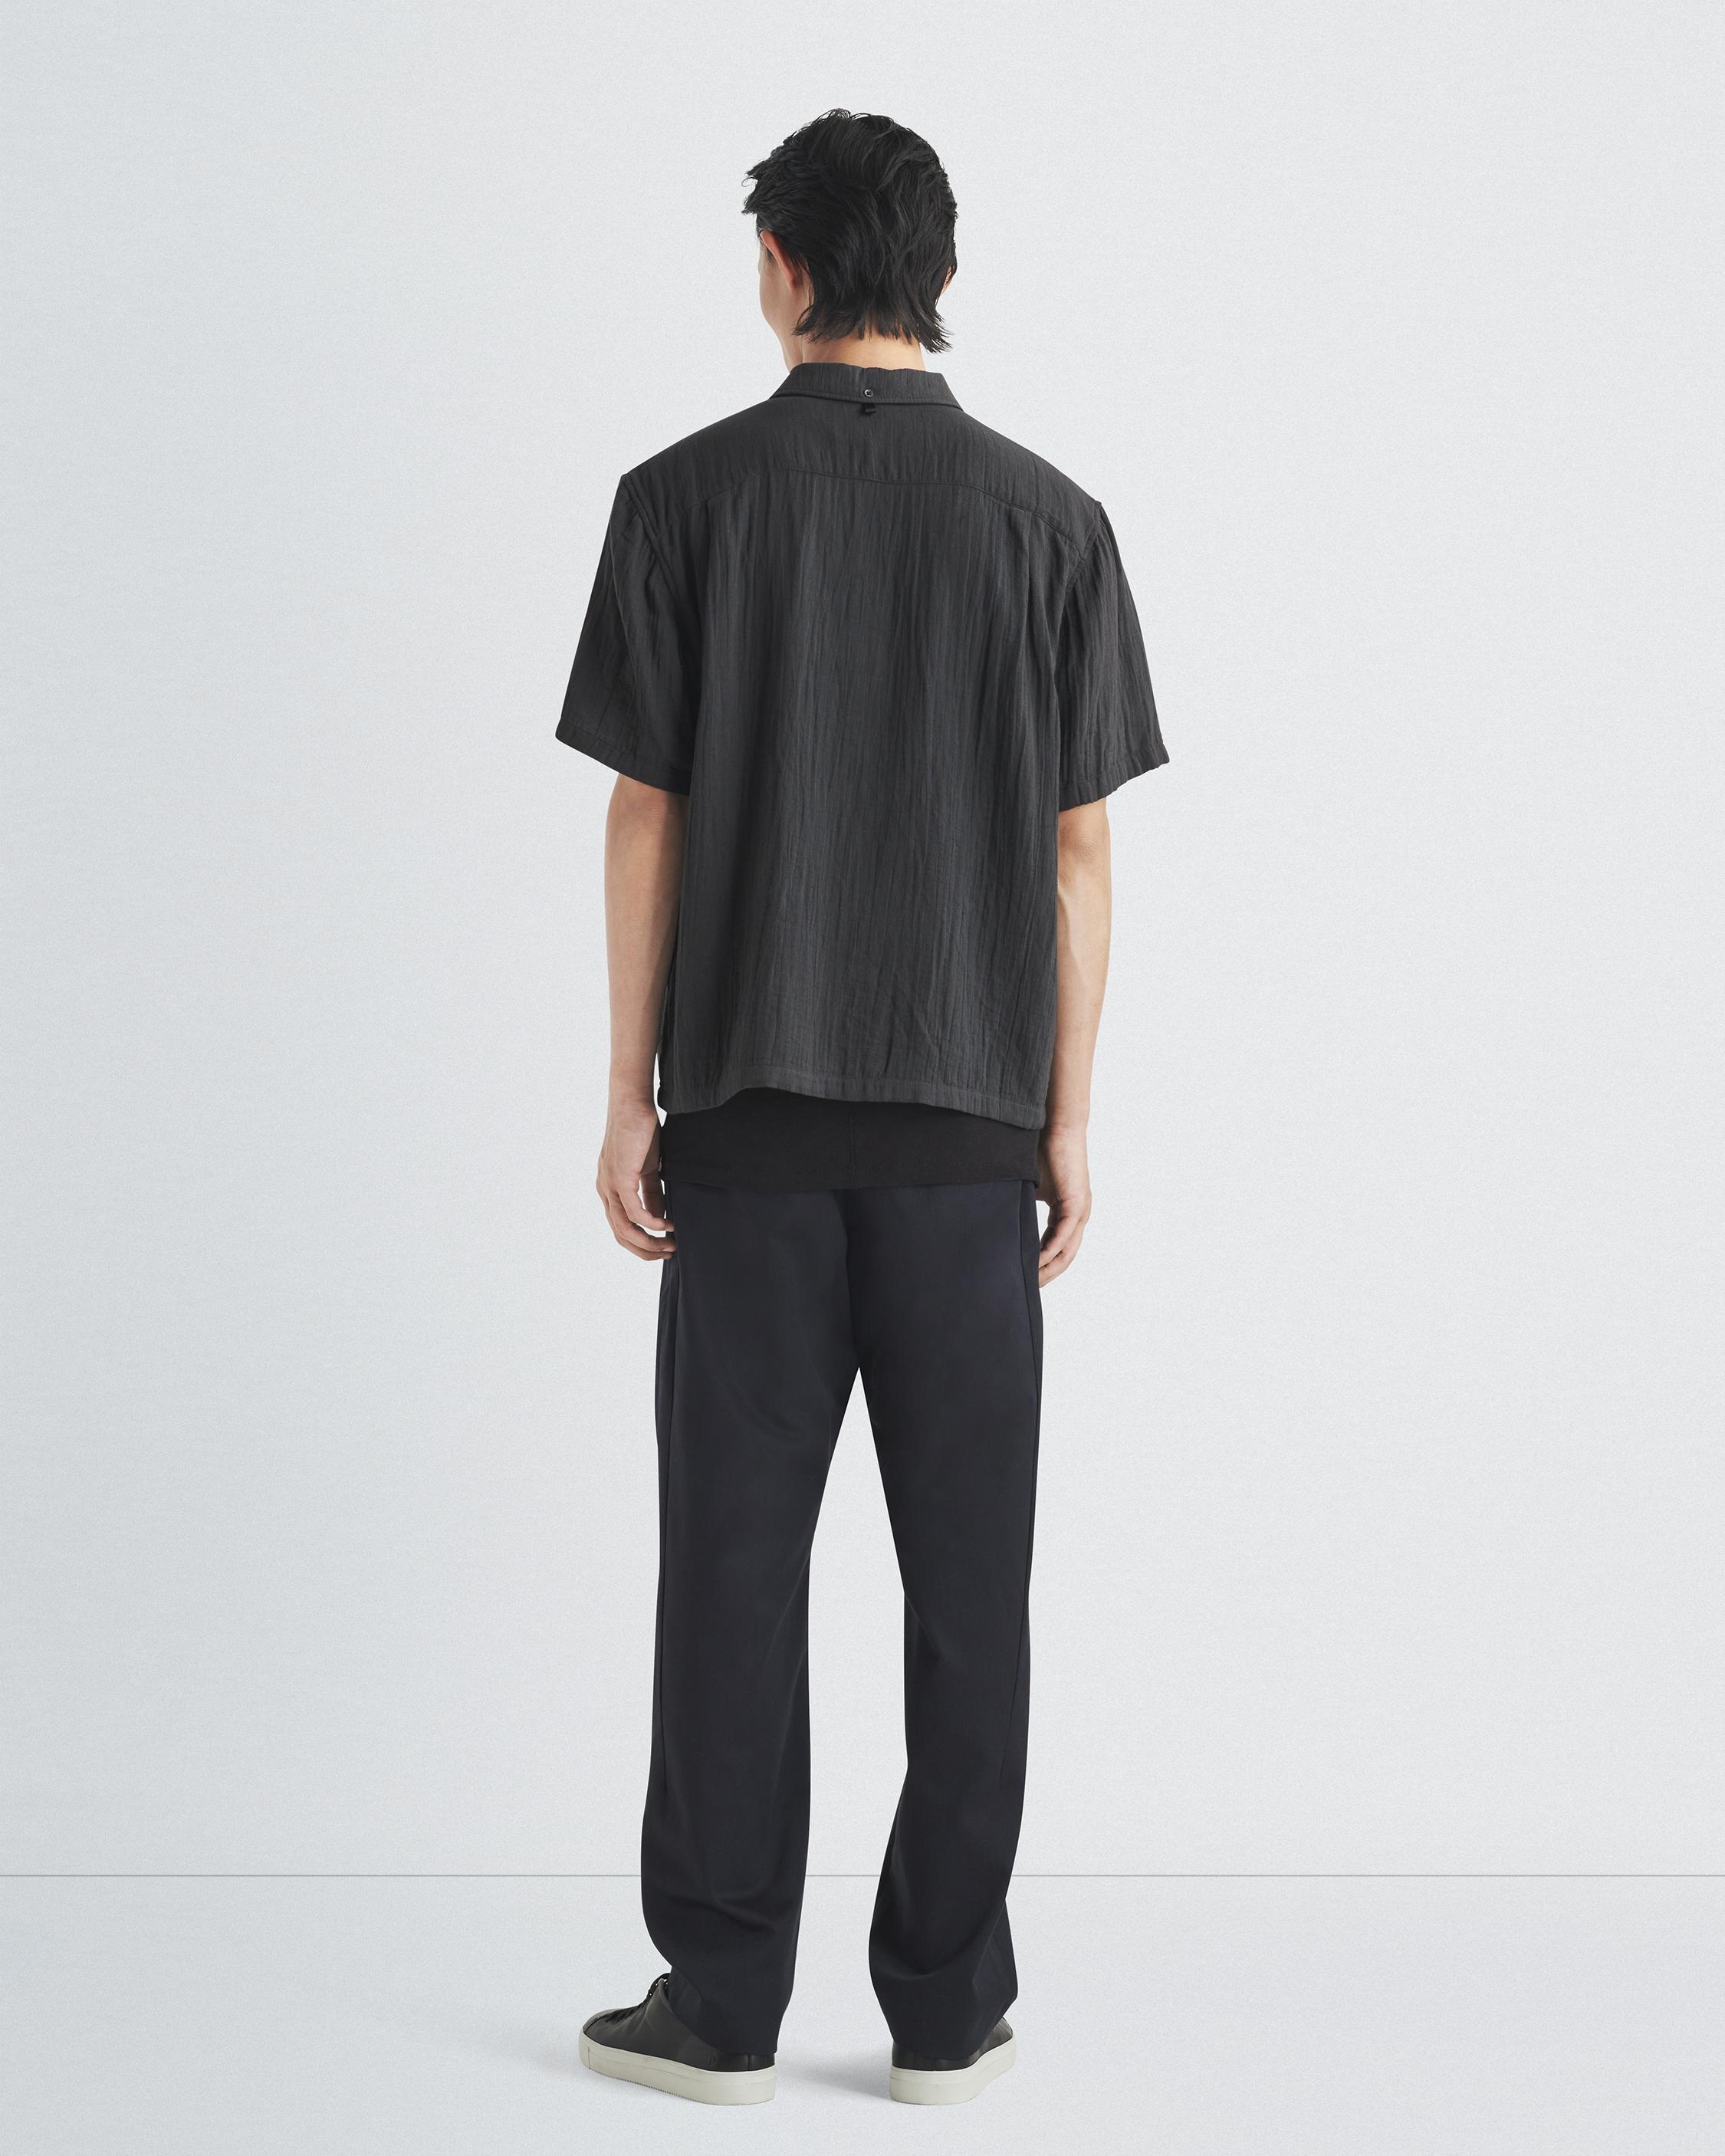 Avery Gauze Camp Shirt
Relaxed Fit - 5